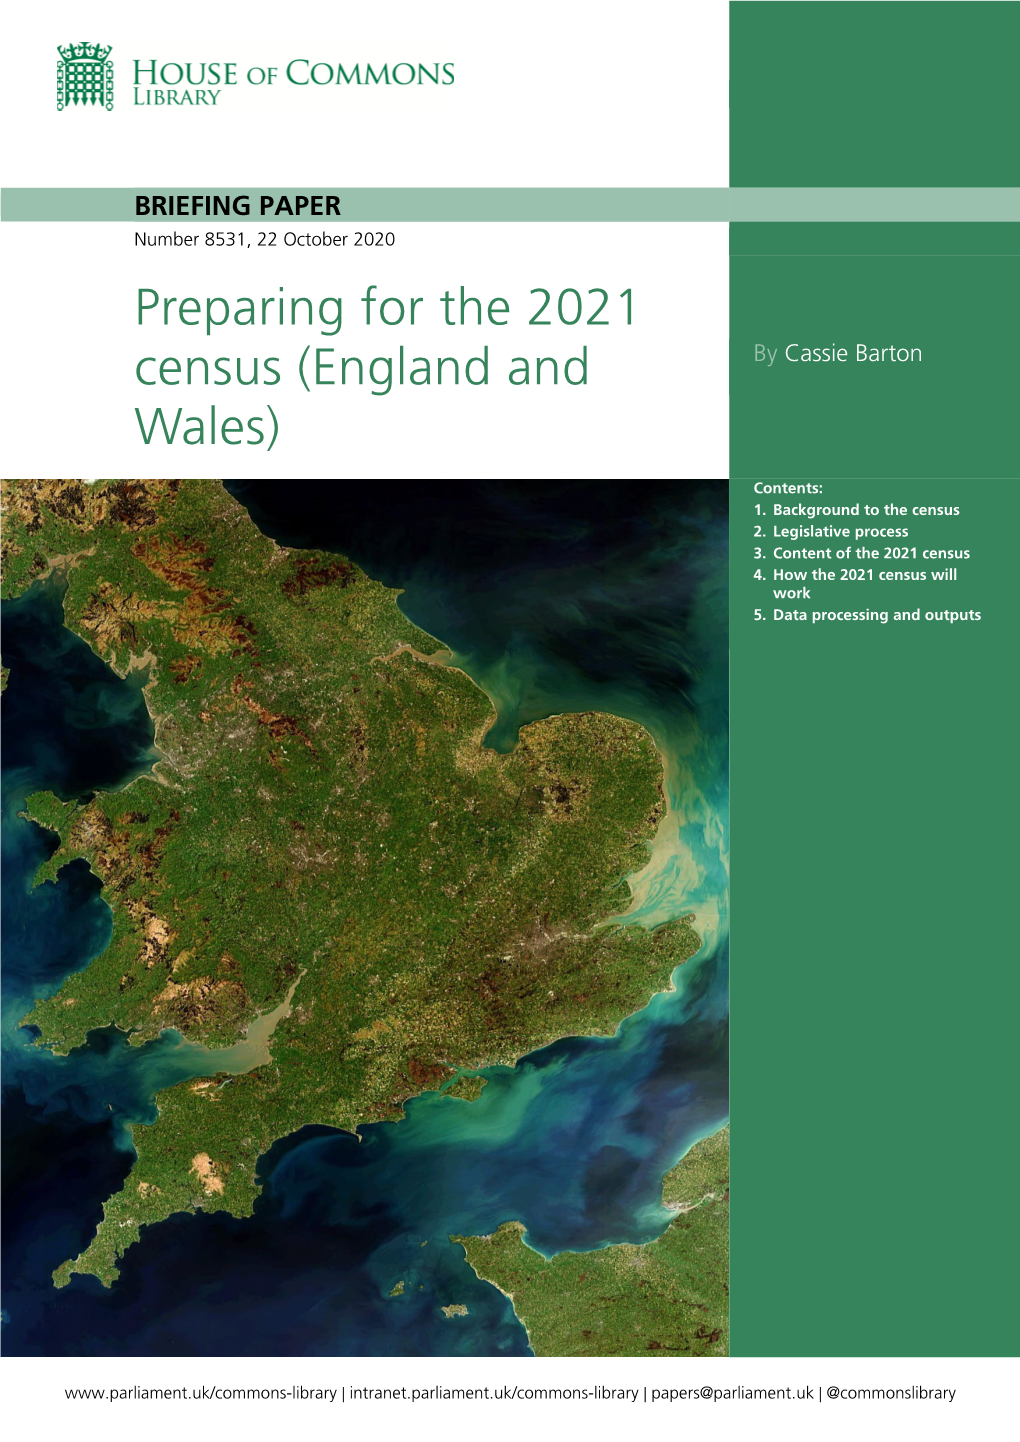 Preparing for the 2021 Census (England and Wales)